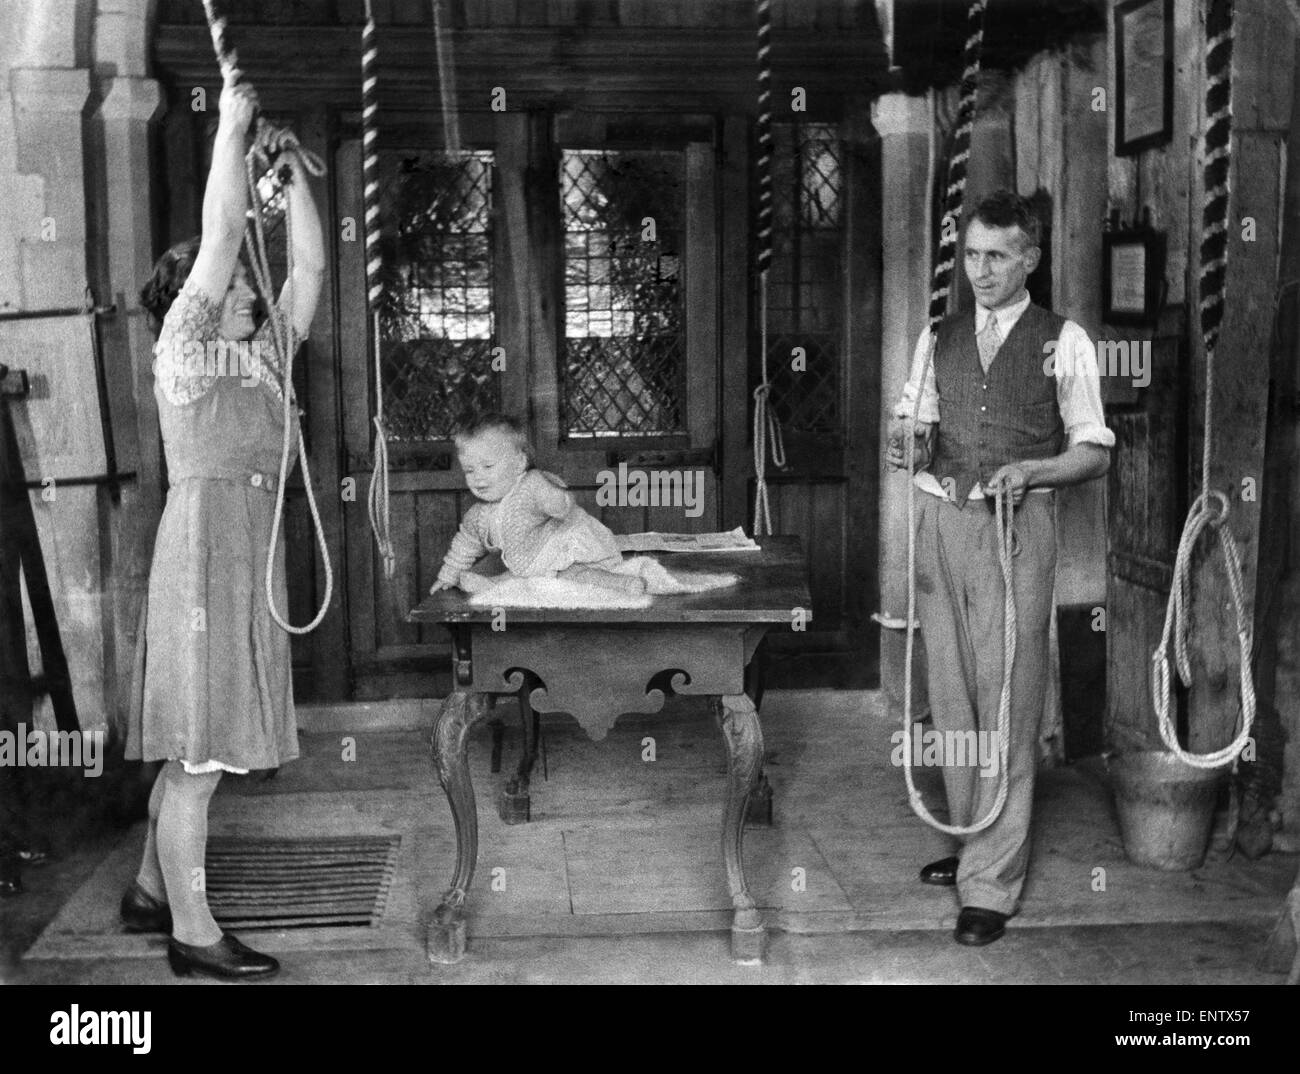 Bellringers baby at victory peal. Jimmy Booker, ten months, goes every Sunday to the village church at Shoreham, Kent with his Mum and Dad who are in the bellringing team. Today was his big day helping to ring the victory peals. 28th August 1945 Stock Photo